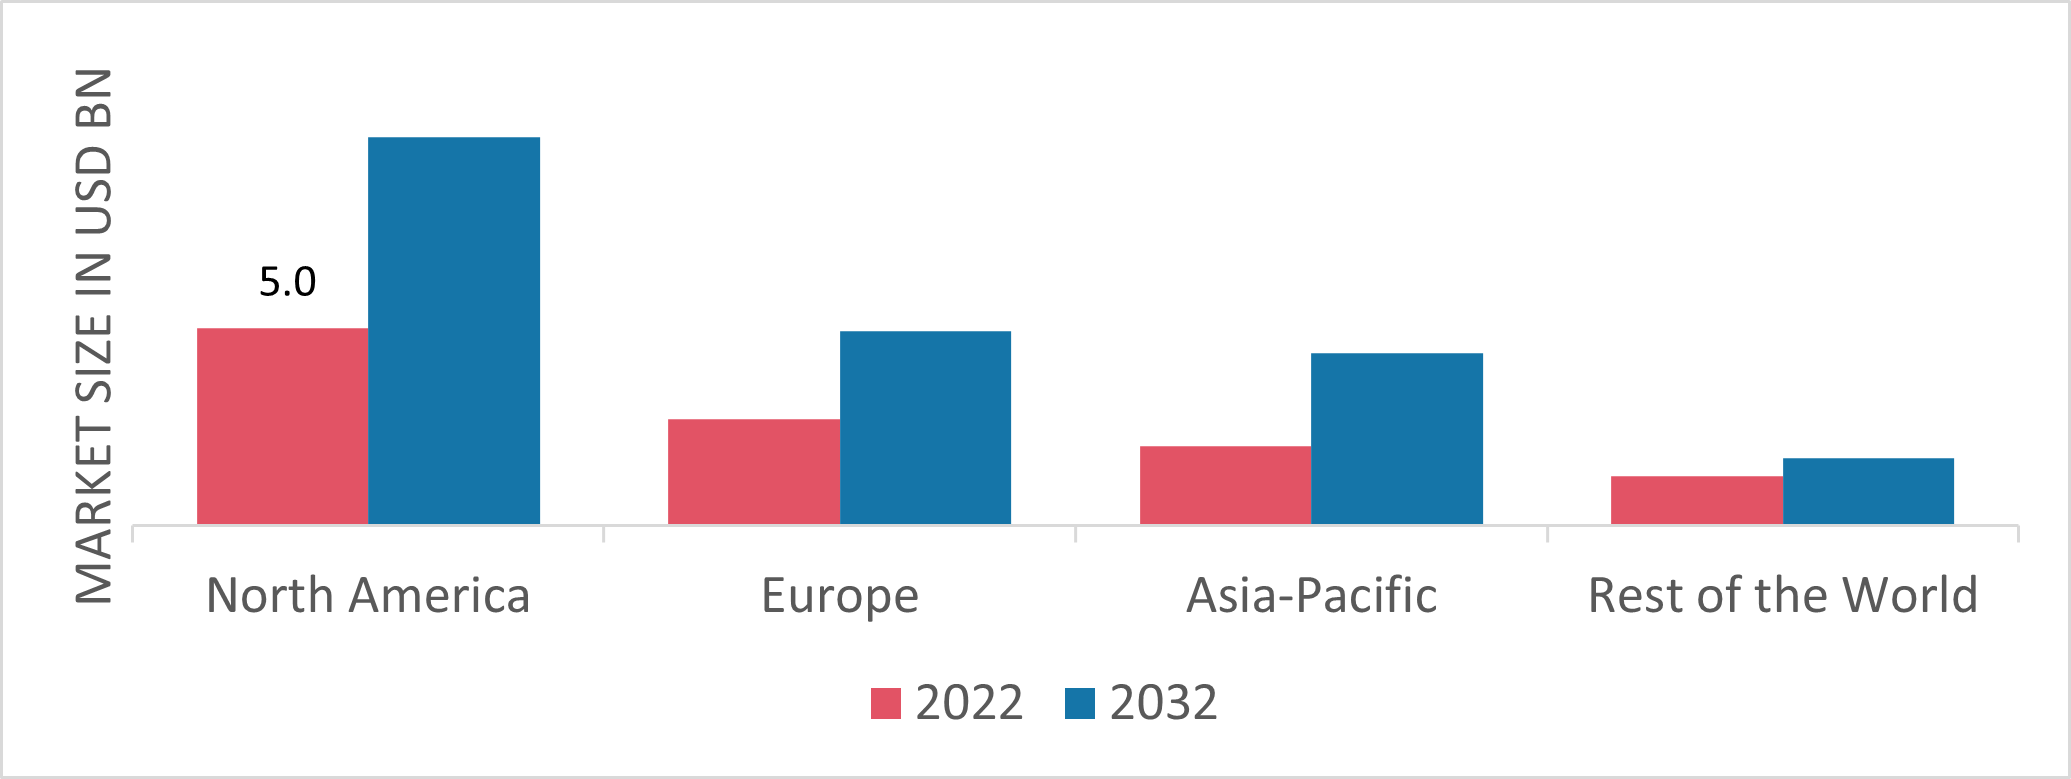 Oil And Gas Waste Heat Recovery Market Share By Region 2022